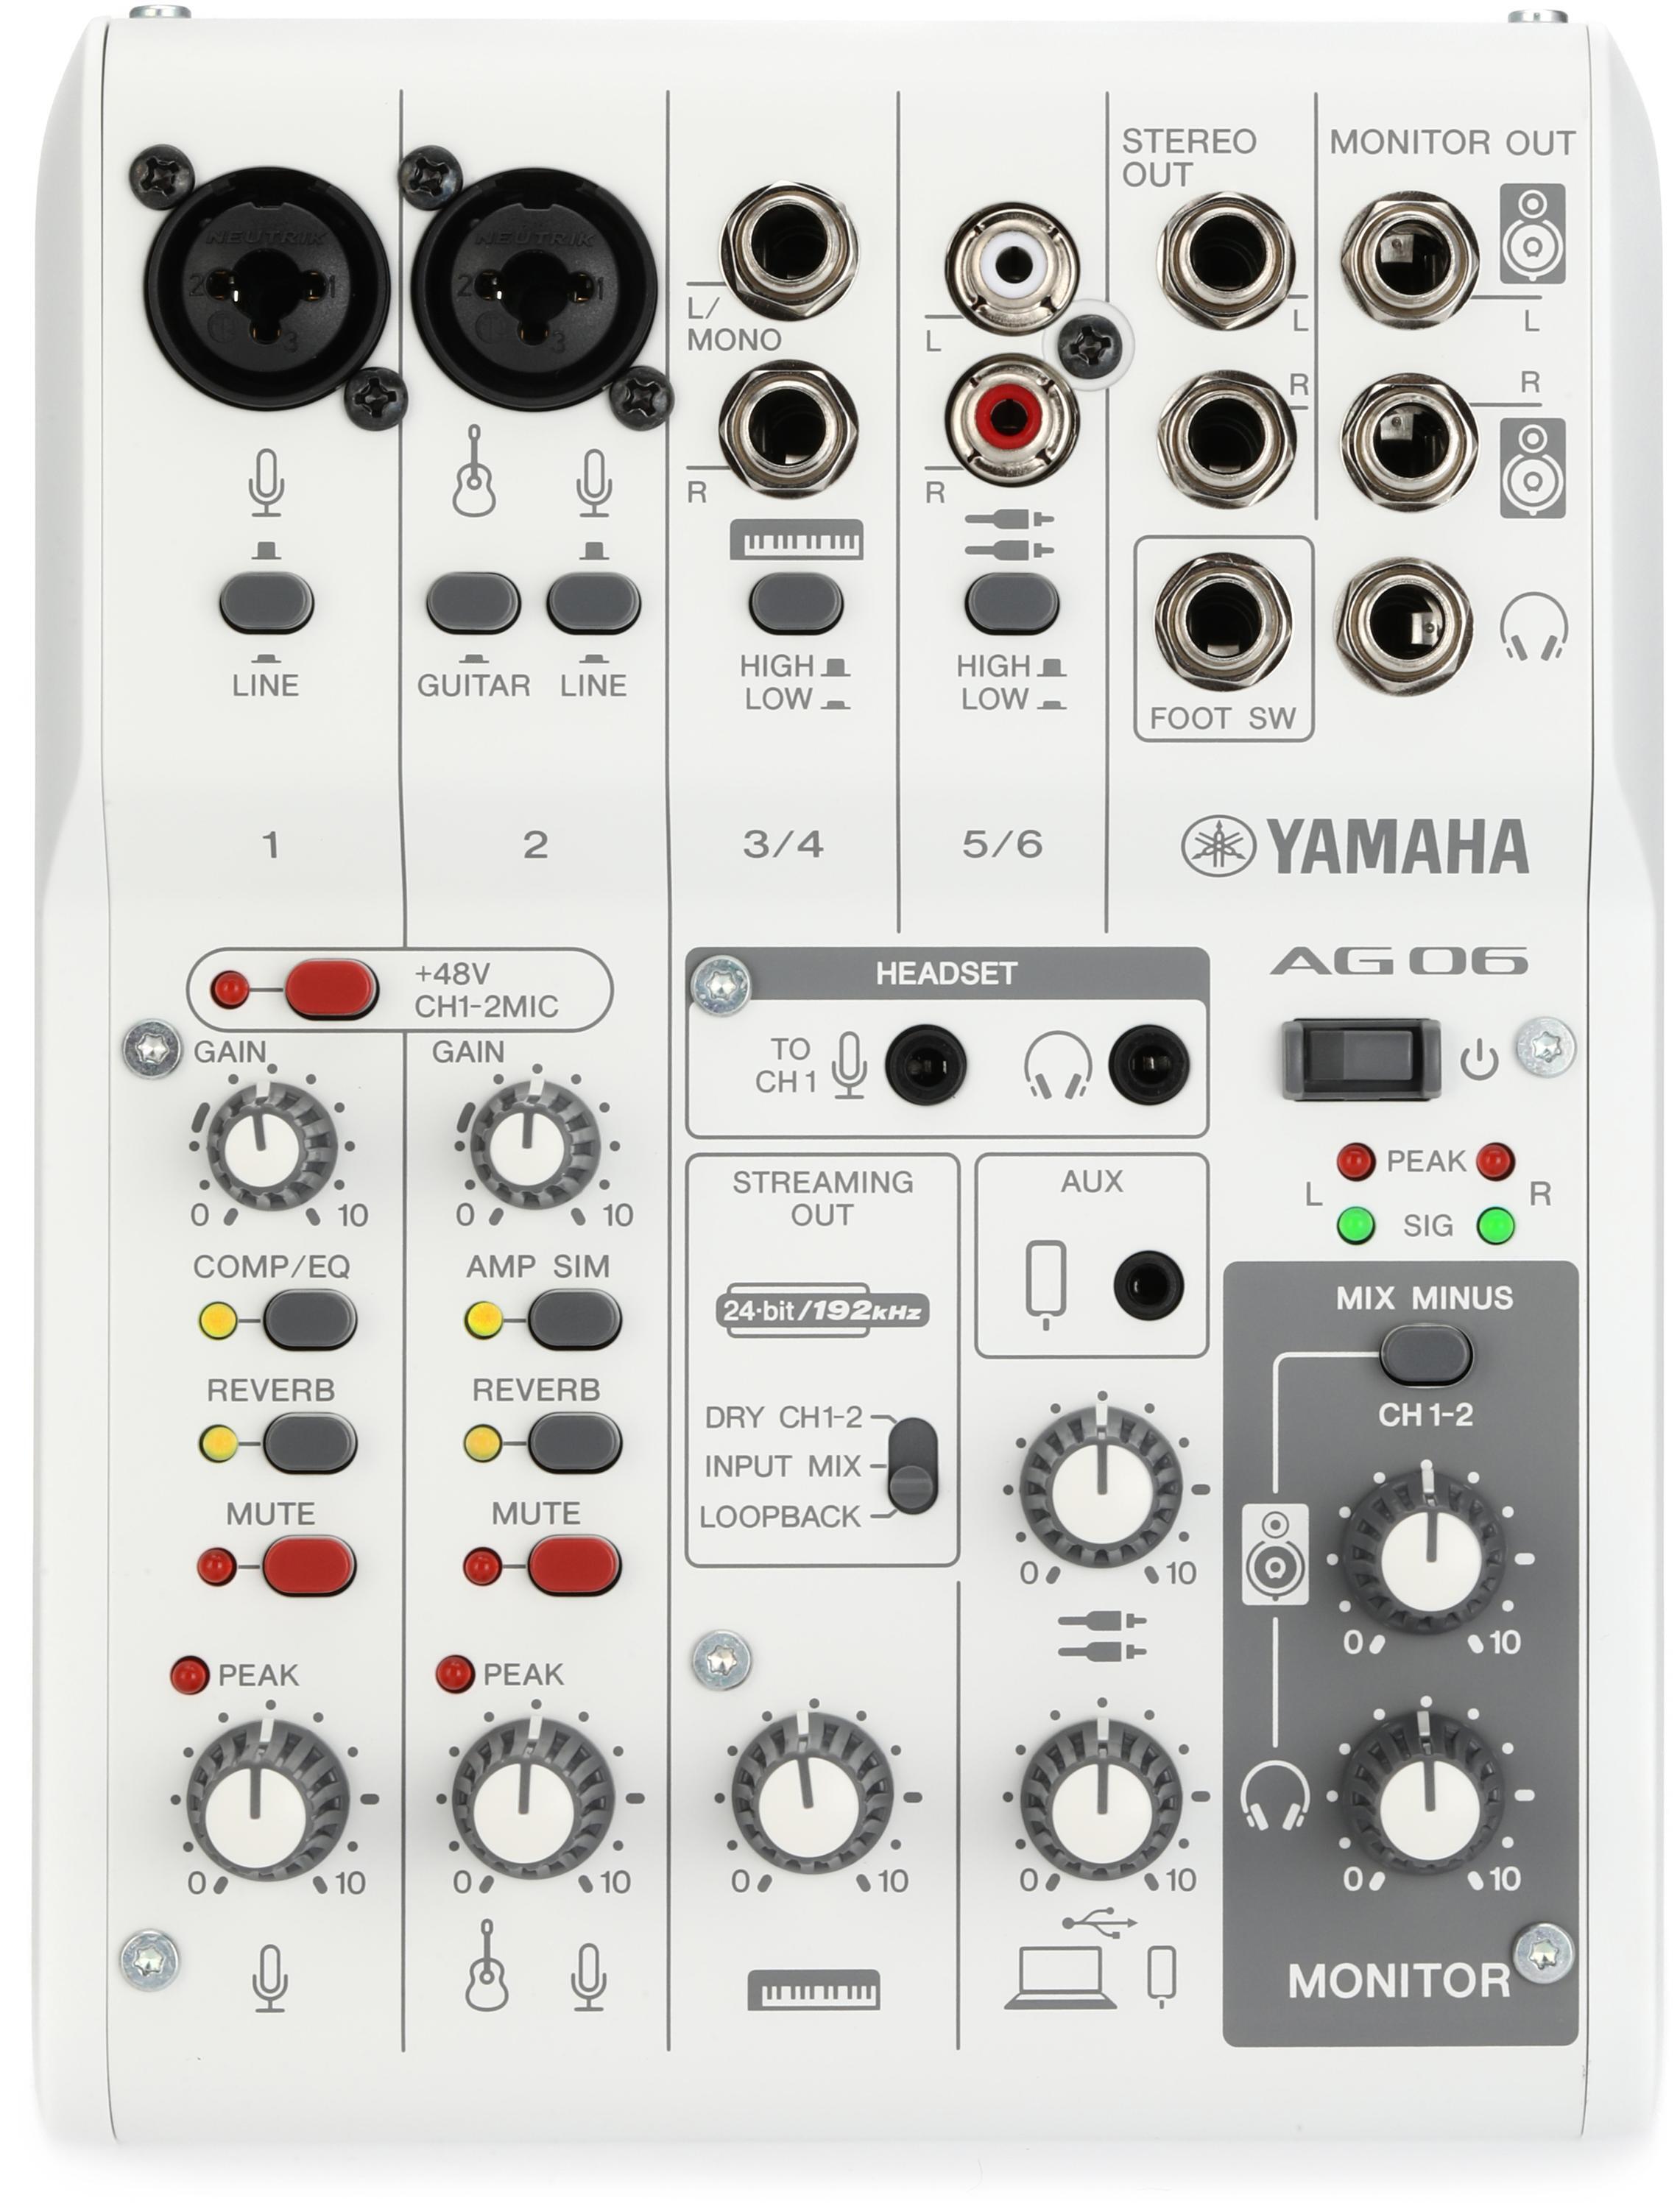 Yamaha AG06 Mk2 6-channel Mixer and USB Audio Interface